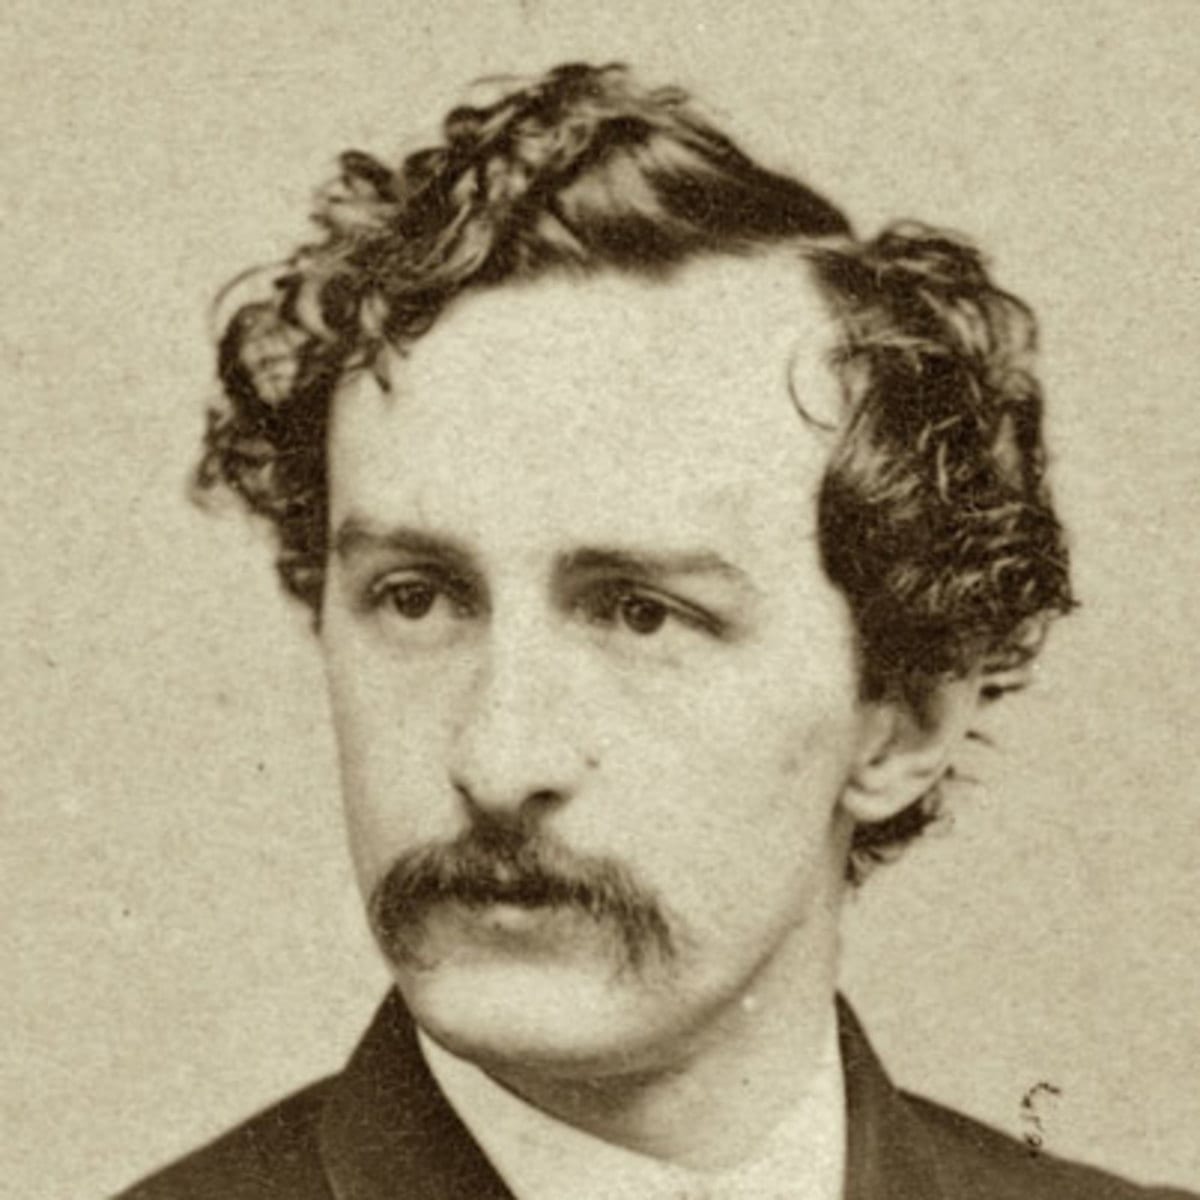 John Wilkes Booth, helped by Dr. Mudd